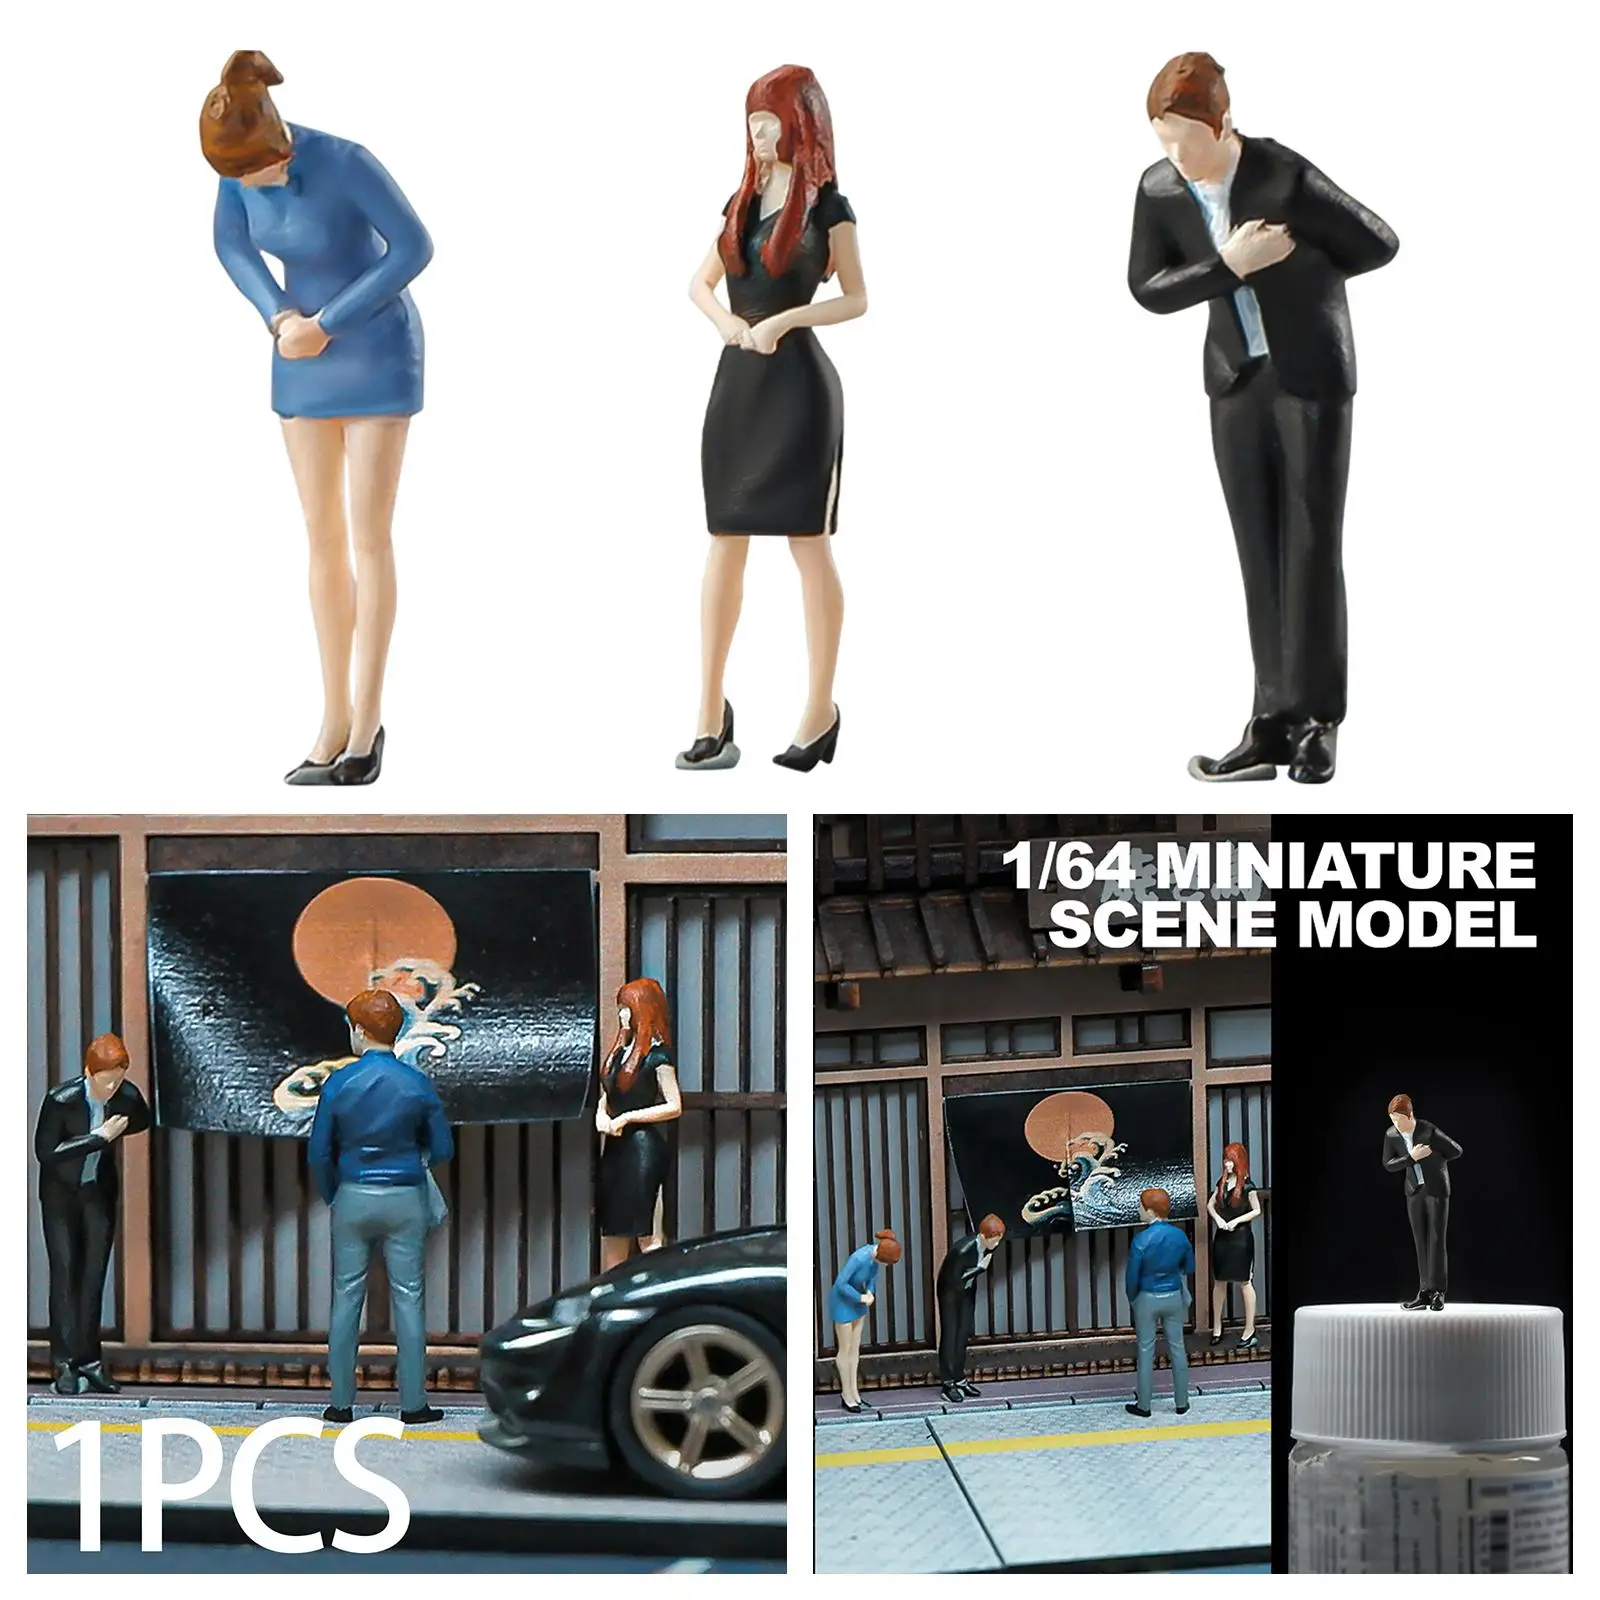 Miniature 1/64 Scale for DIY Projects Street Scene Architecture Model